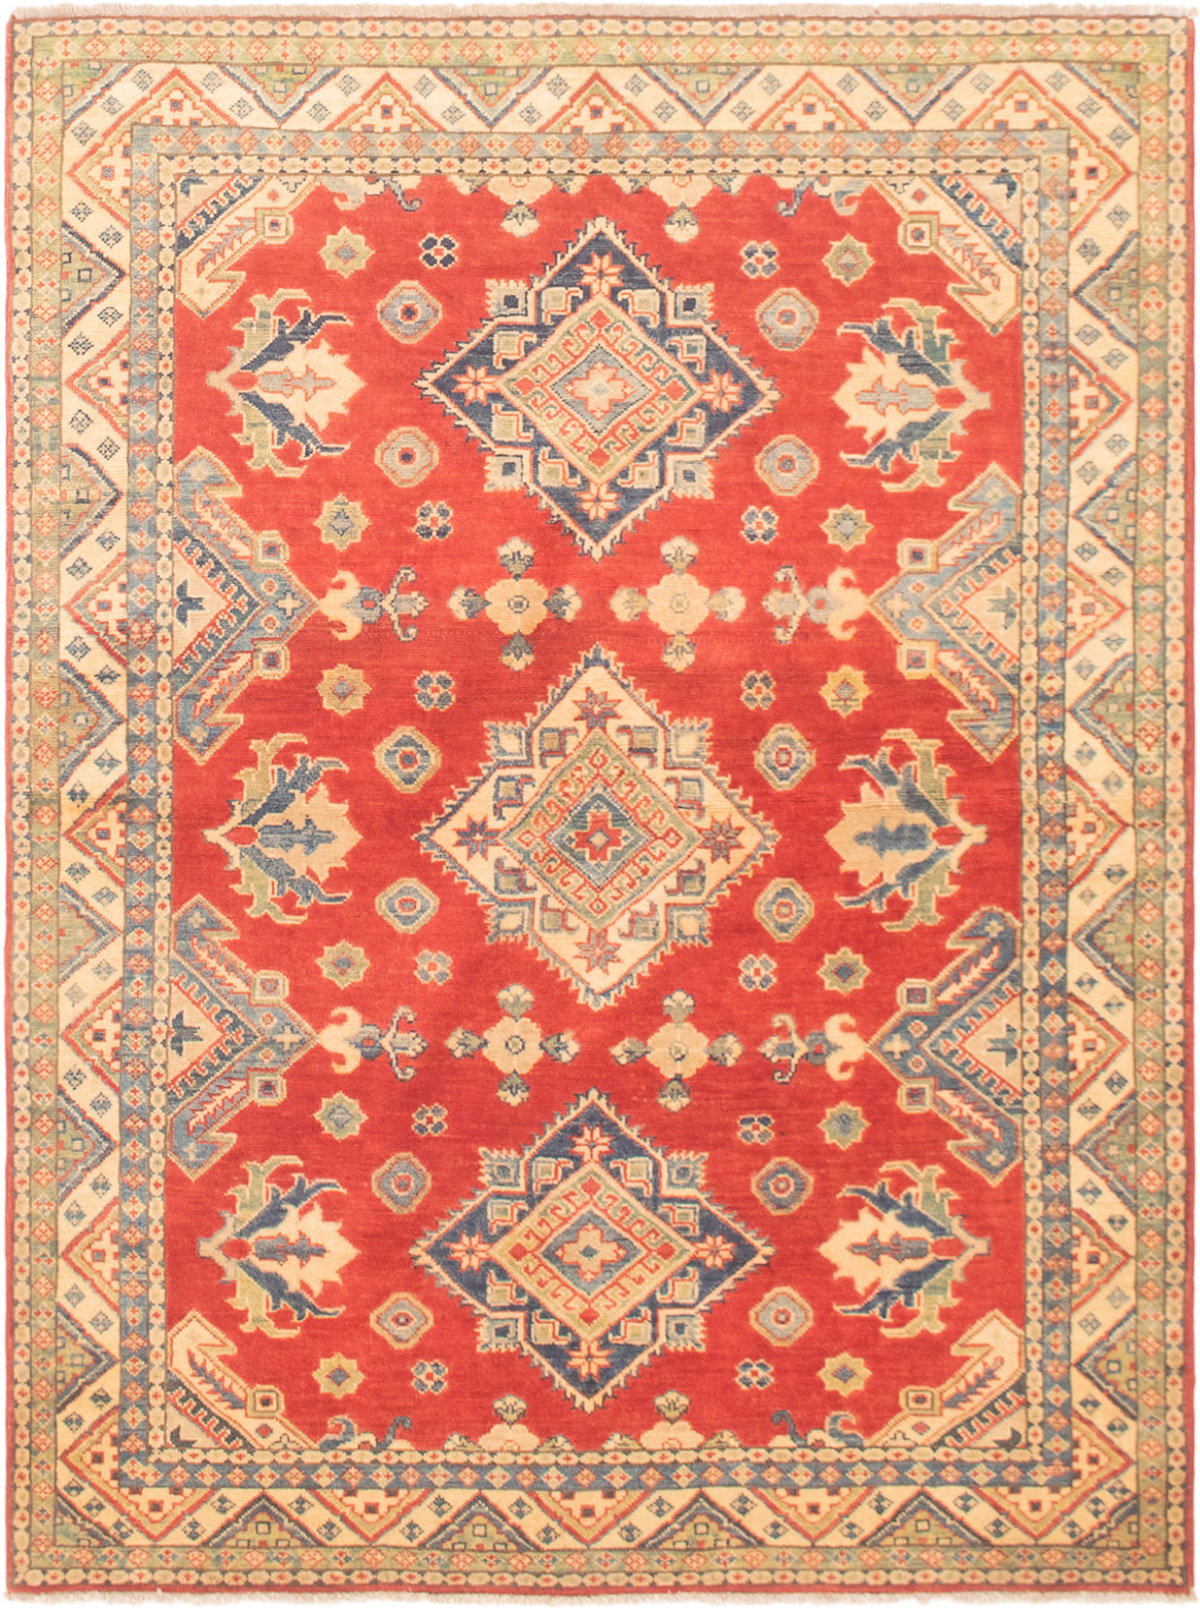 Hand-knotted Finest Gazni Red Wool Rug 4'10" x 6'6"  Size: 4'10" x 6'6"  